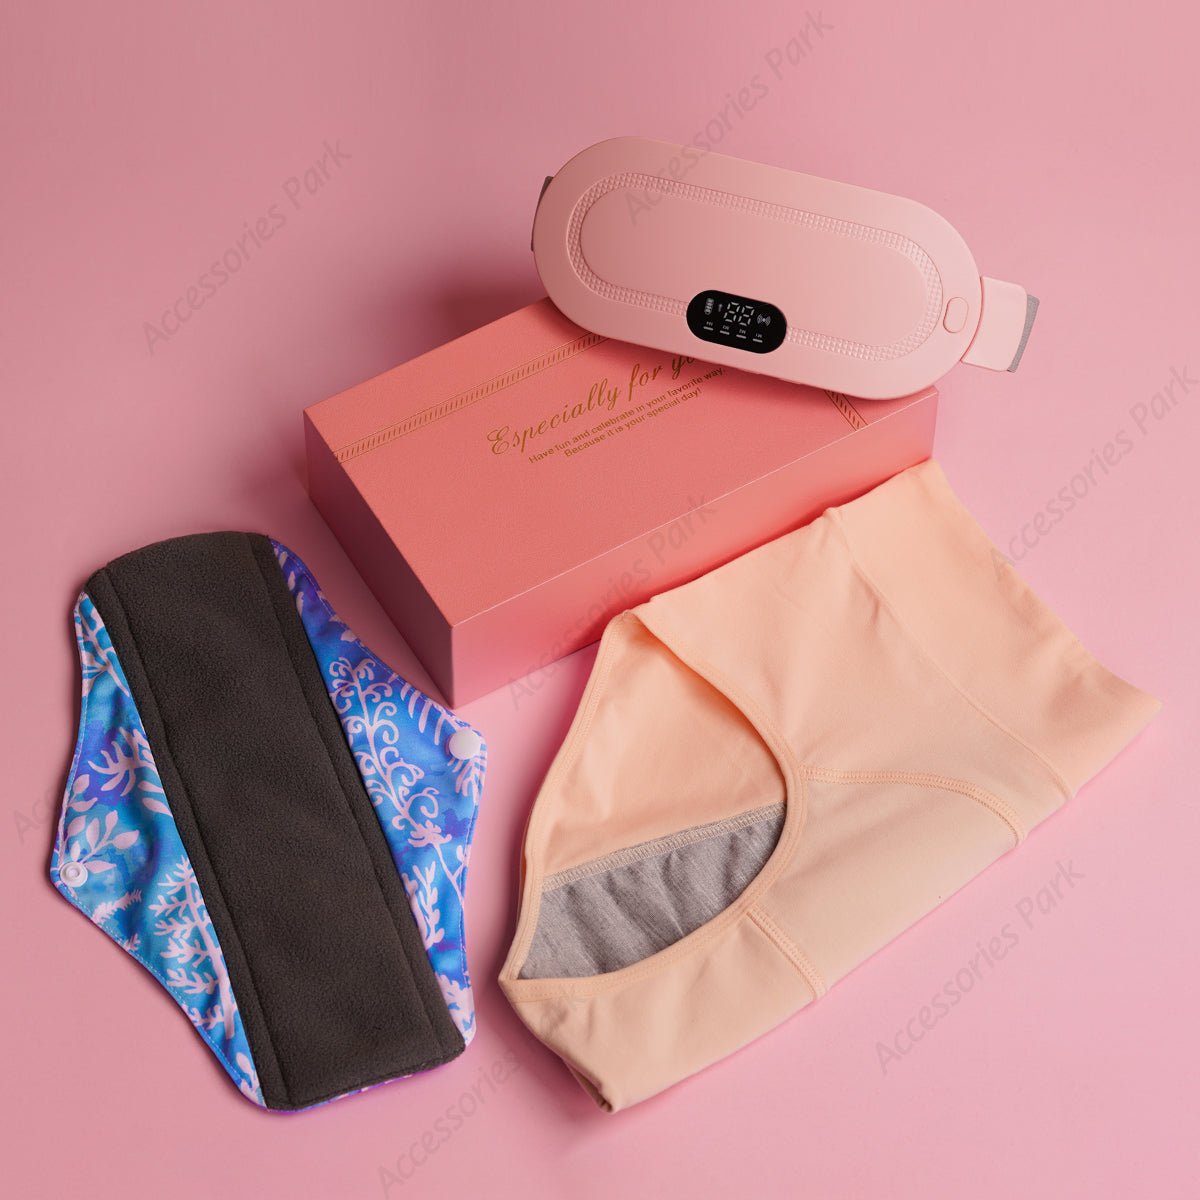 A menstrual combo pack including menstrual heating device, reusable pad and leakage proof menstrual pant.